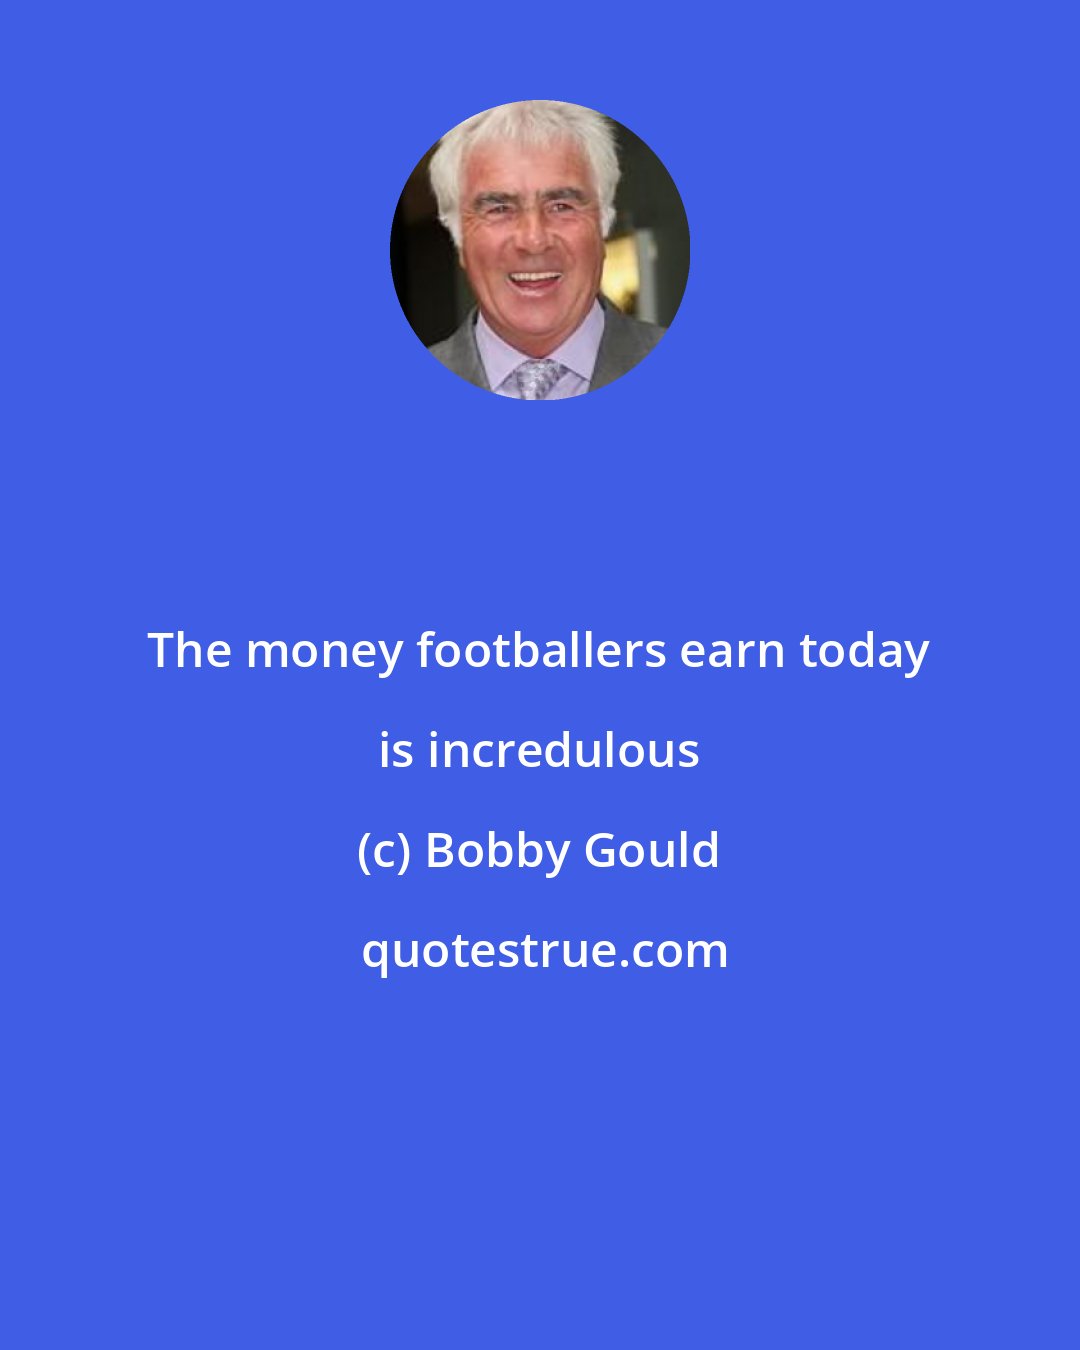 Bobby Gould: The money footballers earn today is incredulous